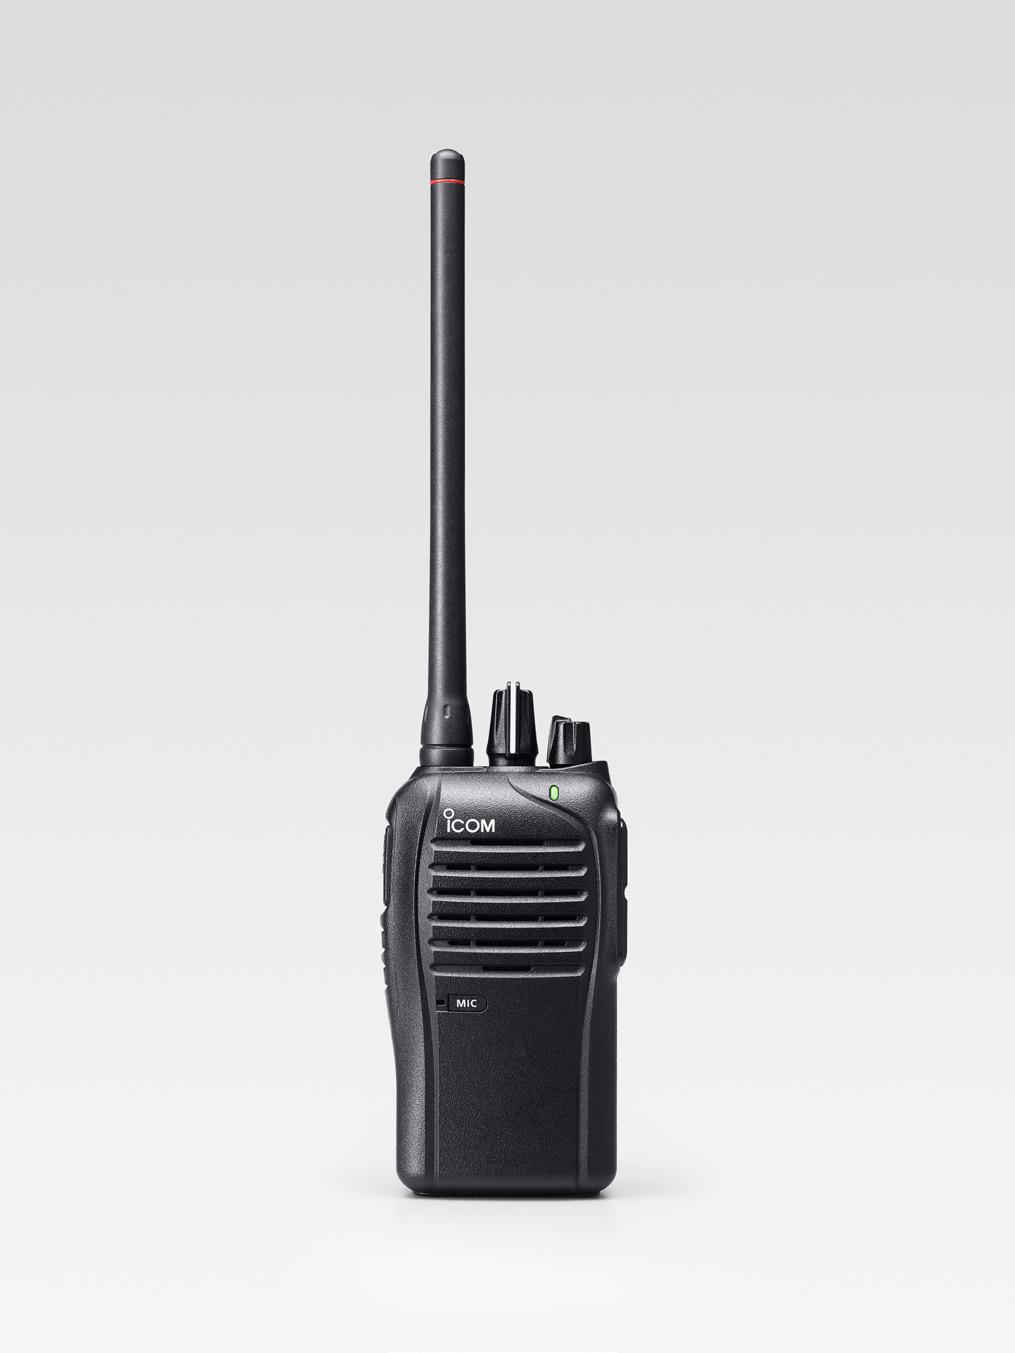 Limited functions only INSTRUCTION MANUAL Limited functions only VHF TRANSCEIVERS if100d Series UHF TRANSCEIVERS if100d Series This device complies with